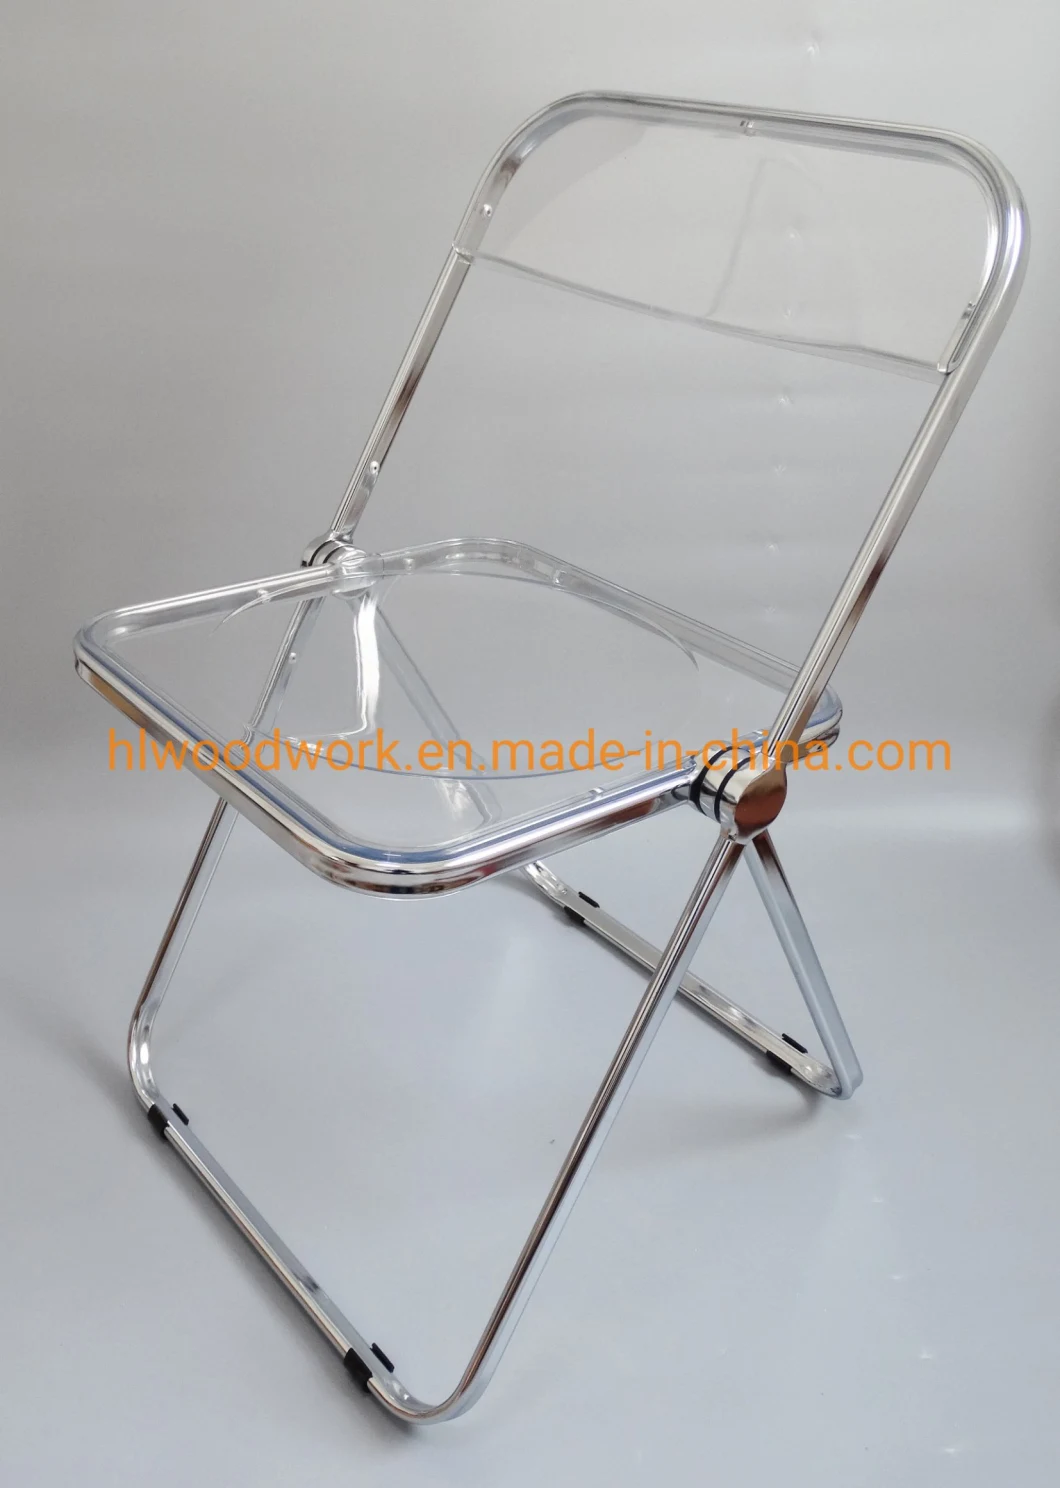 Clear Plastic Folded Chair Office/Bar/Dining/Leisure/Banquet/Wedding/Meeting Folding Plastic Chair in Chrome Frame Transparent Clear PC Plastic Dining Chair